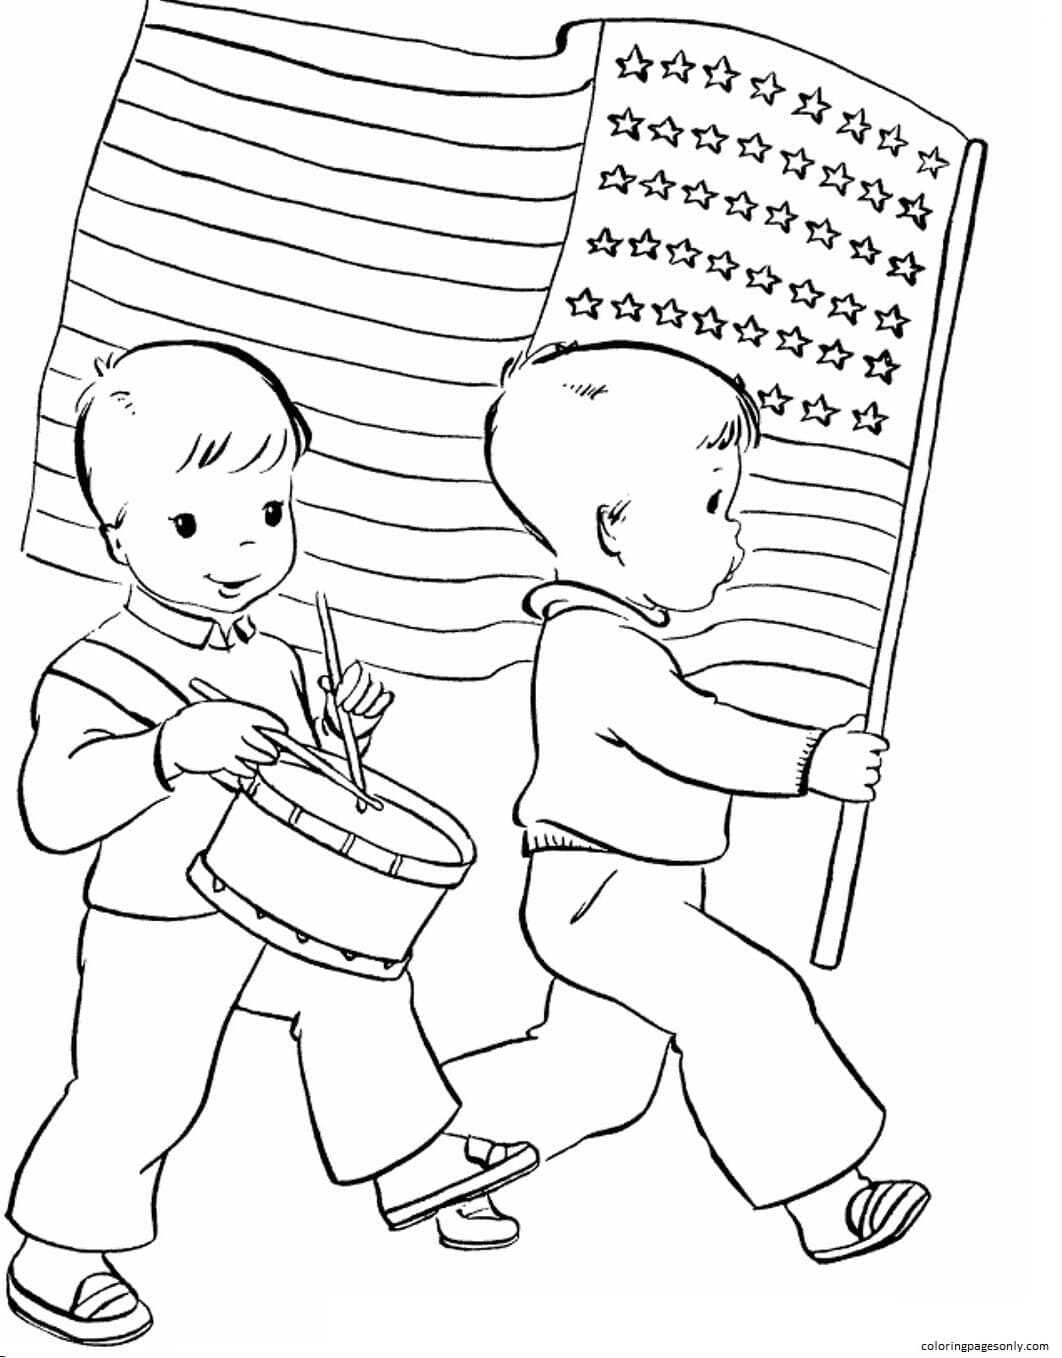 Children go to the holiday parade Coloring Page